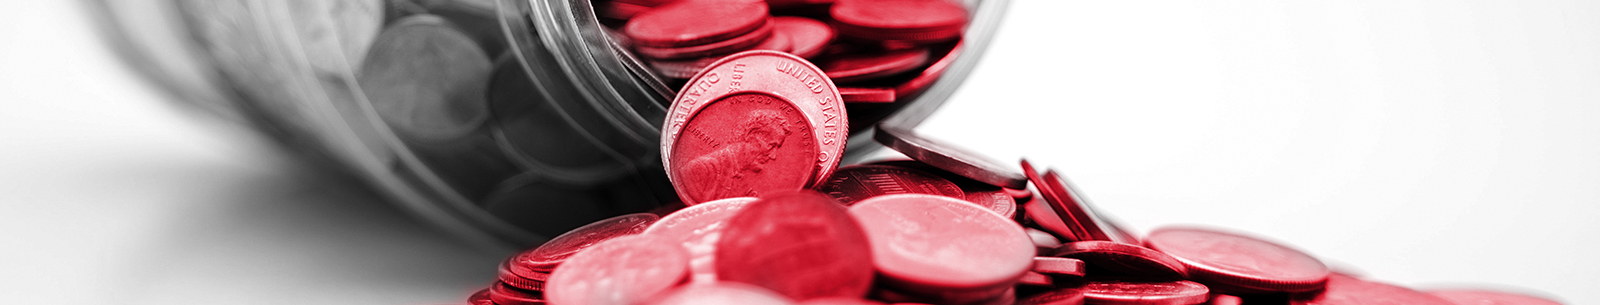 Red coins